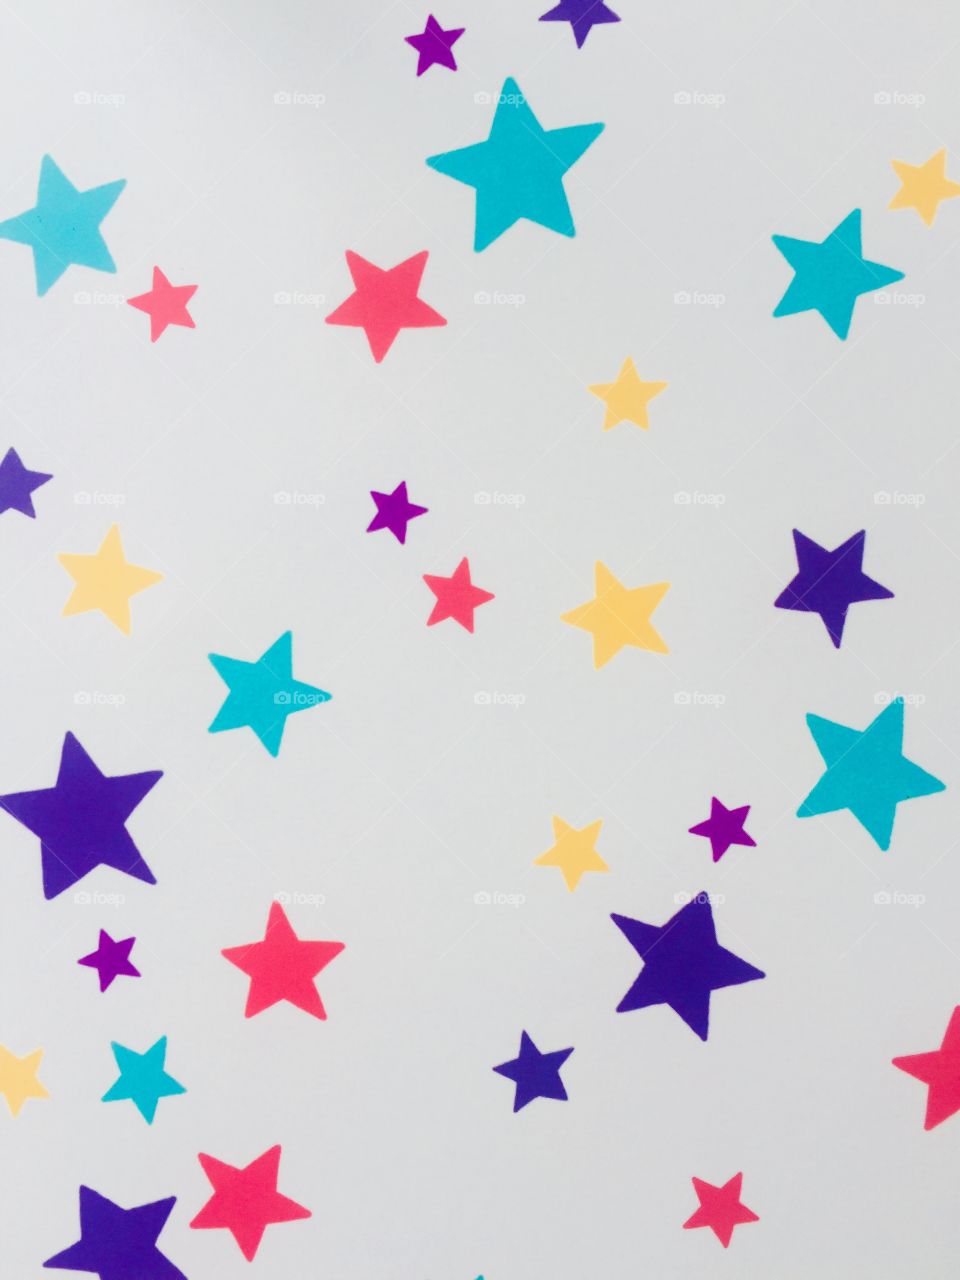 Lots of colourful stars different sizes bundled together on a white piece of paper